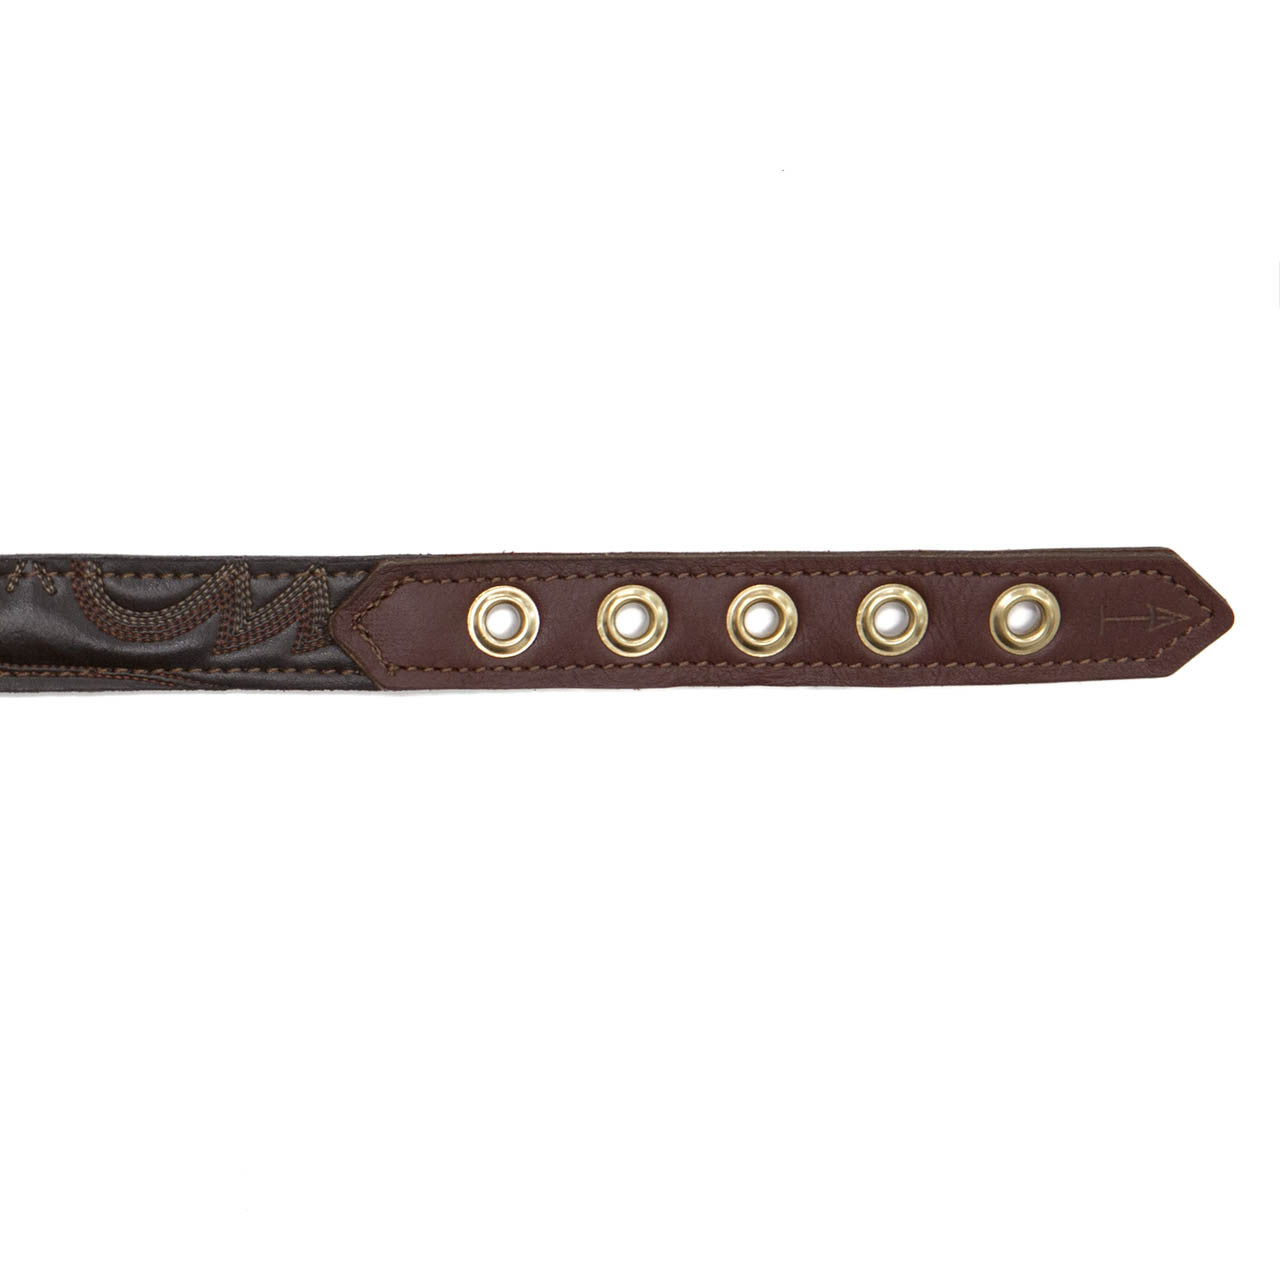 Mahogany Brown Dog Collar with Dark Brown Leather + Tan/Light Rust Stitching (clasp)